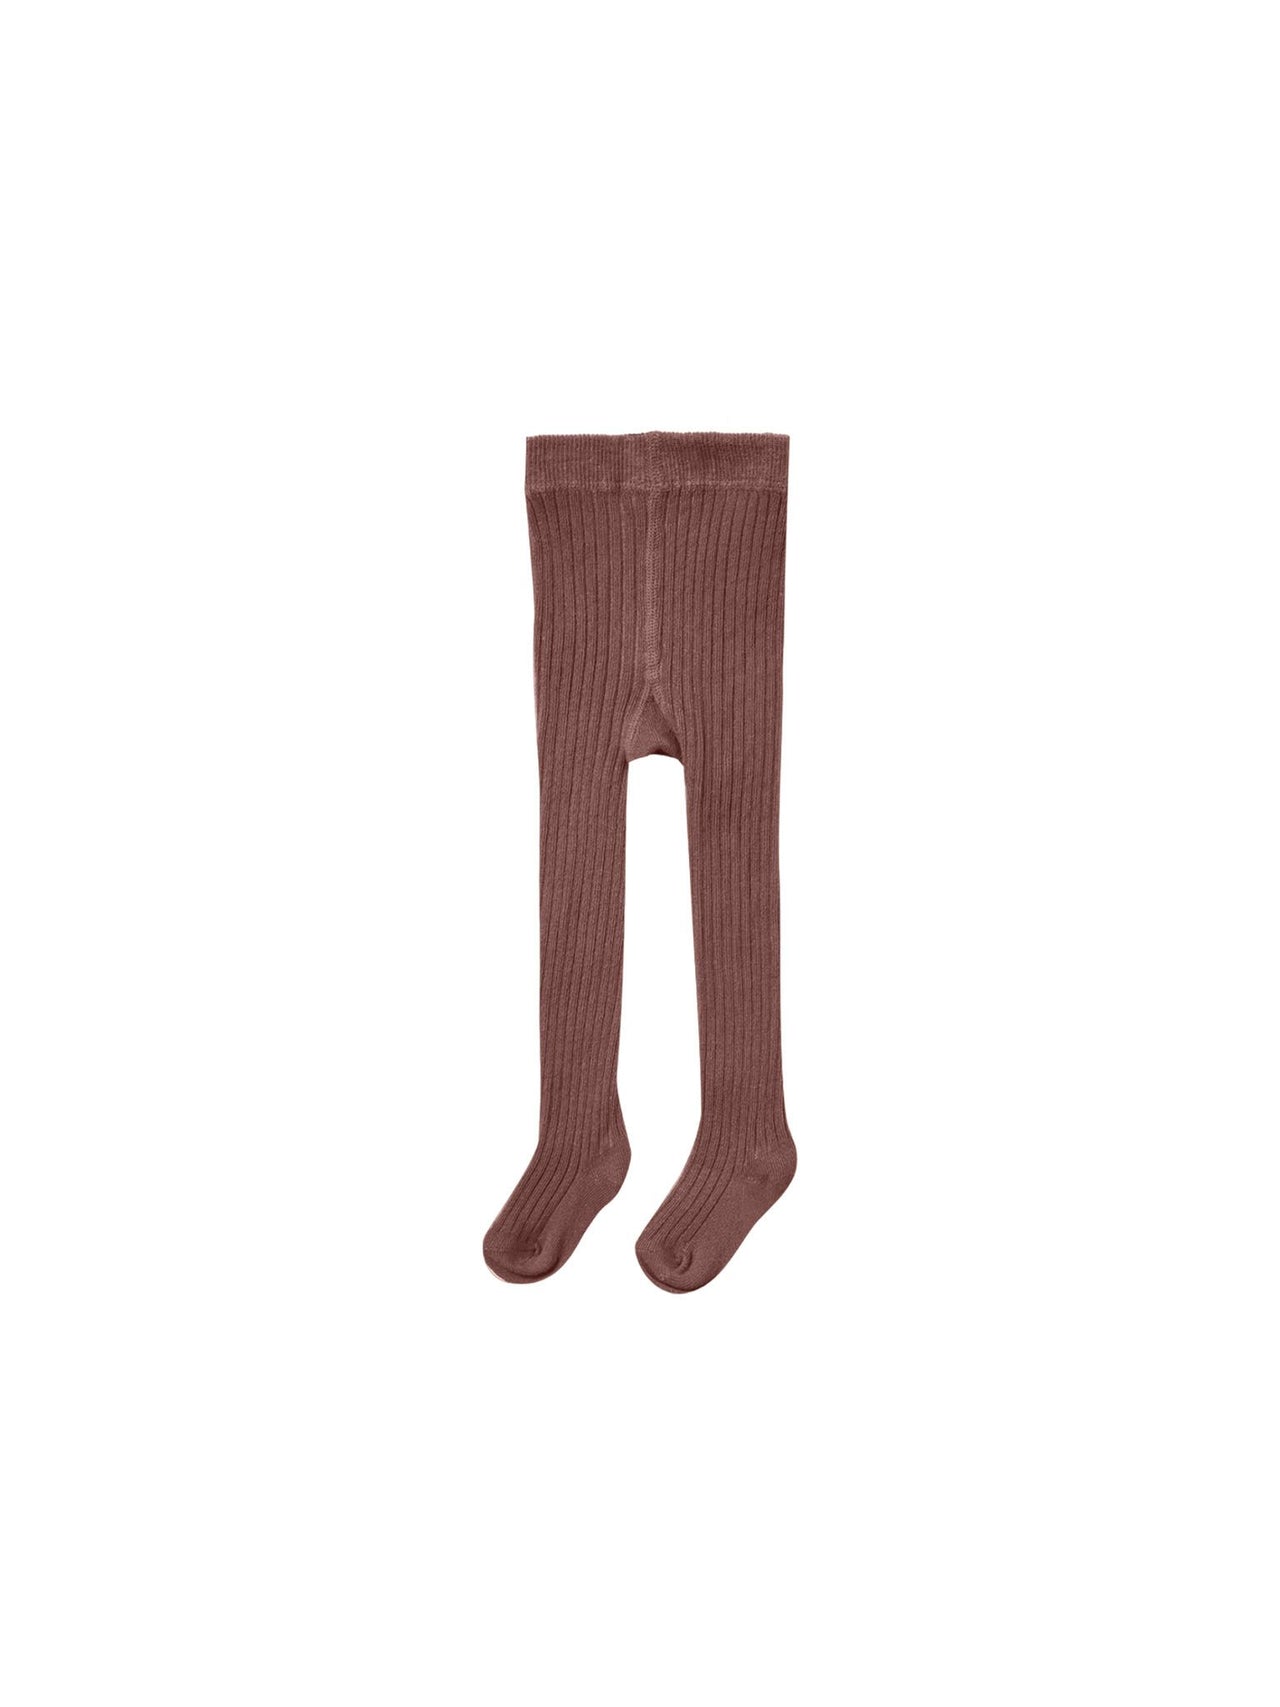 Quincy Mae Ribbed Tights, Plum